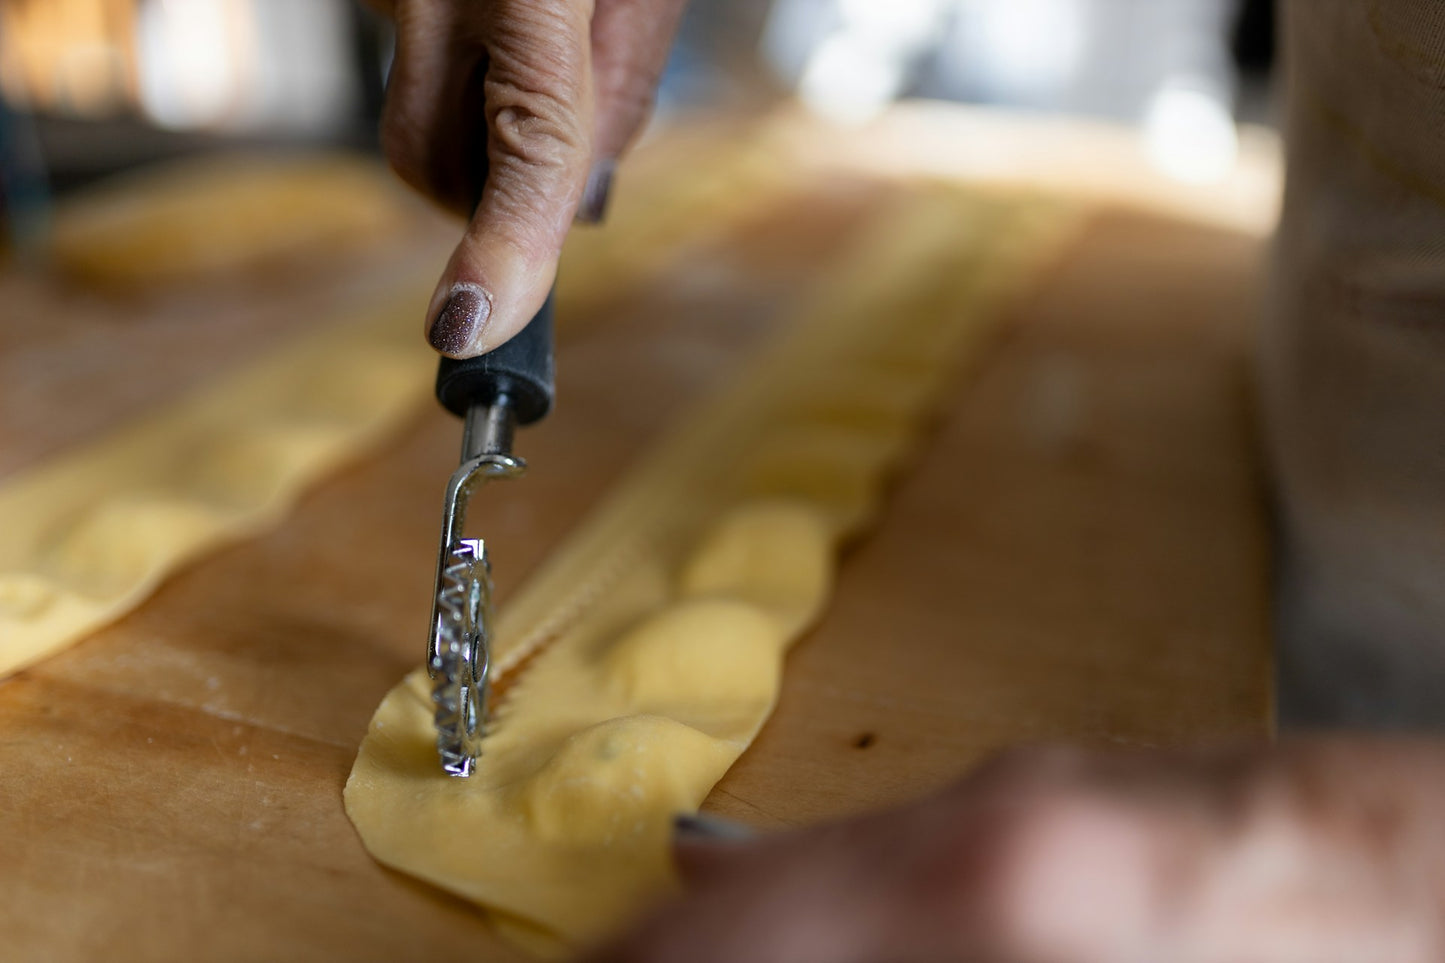 Learn to Make the Best Filled Pasta and Ravioli